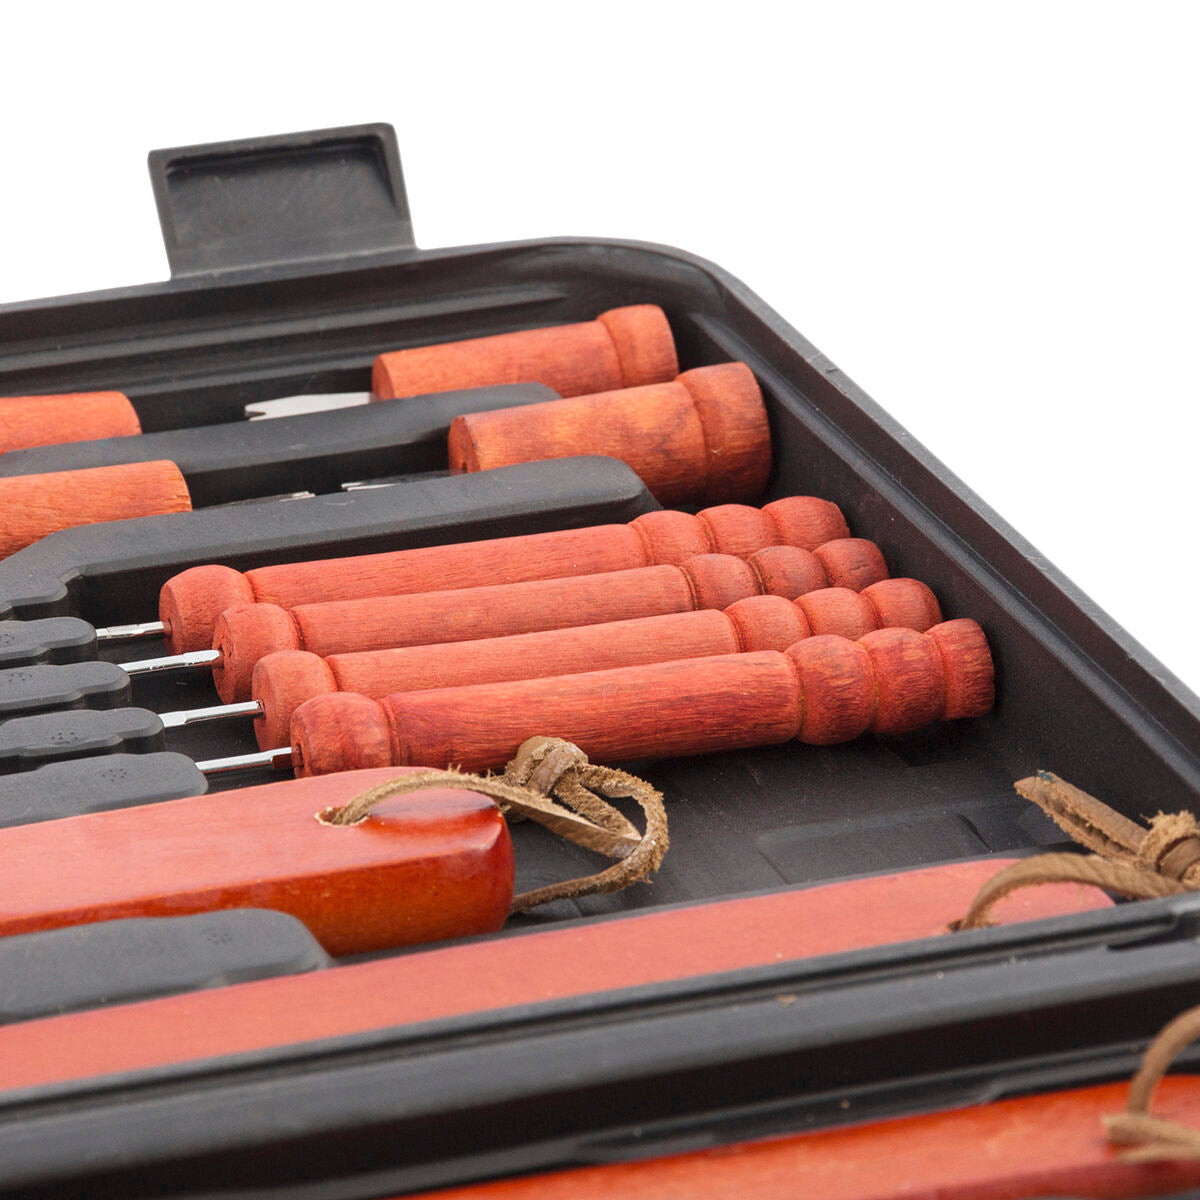 Mallette pour barbecues InnovaGoods (18 Pièces)